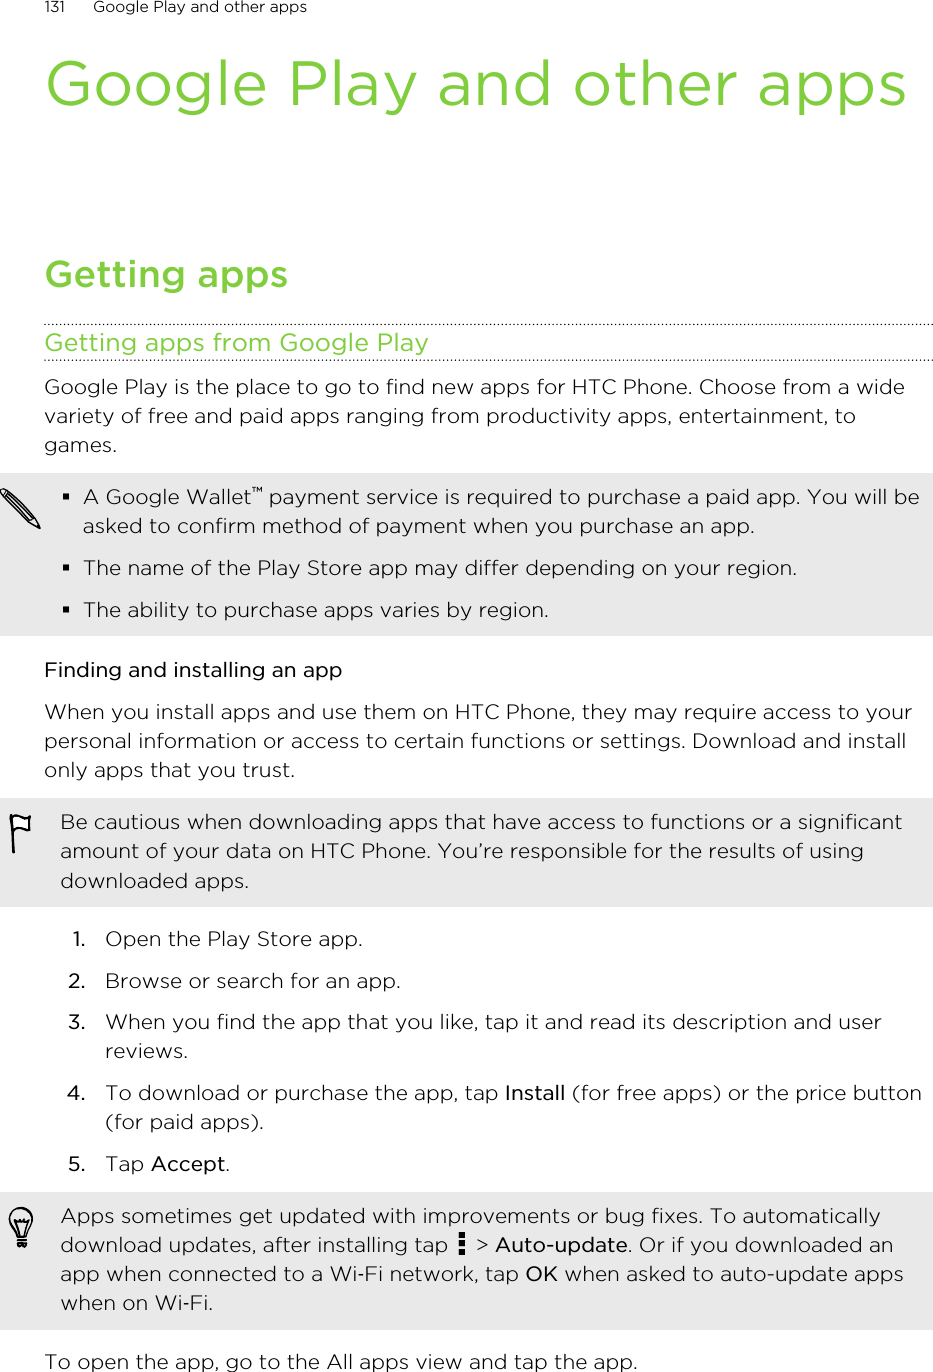 Google Play and other appsGetting appsGetting apps from Google PlayGoogle Play is the place to go to find new apps for HTC Phone. Choose from a widevariety of free and paid apps ranging from productivity apps, entertainment, togames.§A Google Wallet™ payment service is required to purchase a paid app. You will beasked to confirm method of payment when you purchase an app.§The name of the Play Store app may differ depending on your region.§The ability to purchase apps varies by region.Finding and installing an appWhen you install apps and use them on HTC Phone, they may require access to yourpersonal information or access to certain functions or settings. Download and installonly apps that you trust.Be cautious when downloading apps that have access to functions or a significantamount of your data on HTC Phone. You’re responsible for the results of usingdownloaded apps.1. Open the Play Store app.2. Browse or search for an app.3. When you find the app that you like, tap it and read its description and userreviews.4. To download or purchase the app, tap Install (for free apps) or the price button(for paid apps).5. Tap Accept. Apps sometimes get updated with improvements or bug fixes. To automaticallydownload updates, after installing tap   &gt; Auto-update. Or if you downloaded anapp when connected to a Wi‑Fi network, tap OK when asked to auto-update appswhen on Wi‑Fi.To open the app, go to the All apps view and tap the app.131 Google Play and other appsHTC Confidential for Certification HTC Confidential for Certification